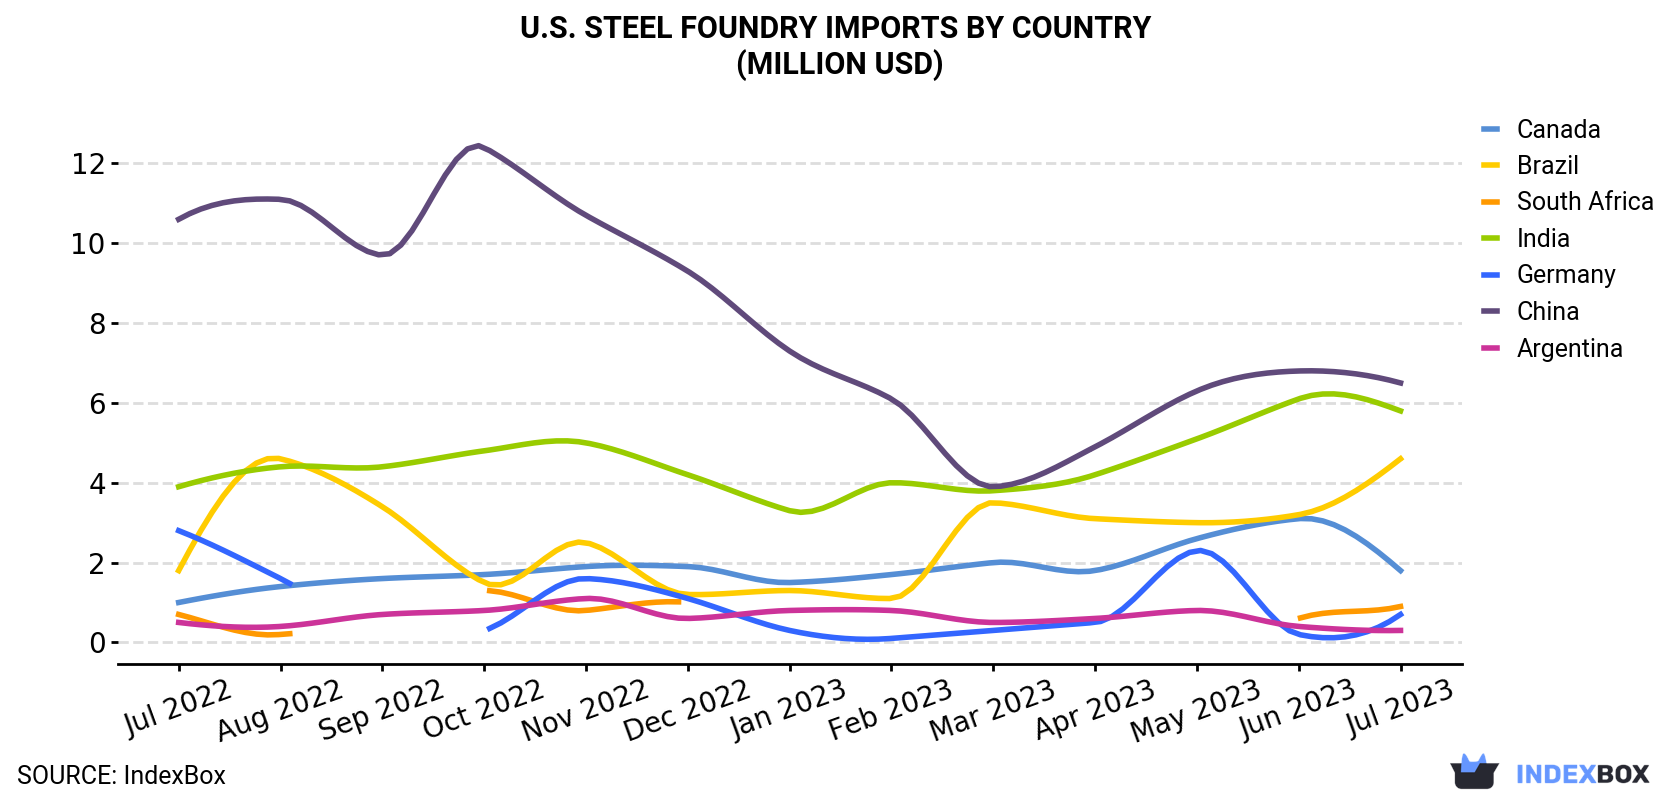 U.S. Steel Foundry Imports By Country (Million USD)